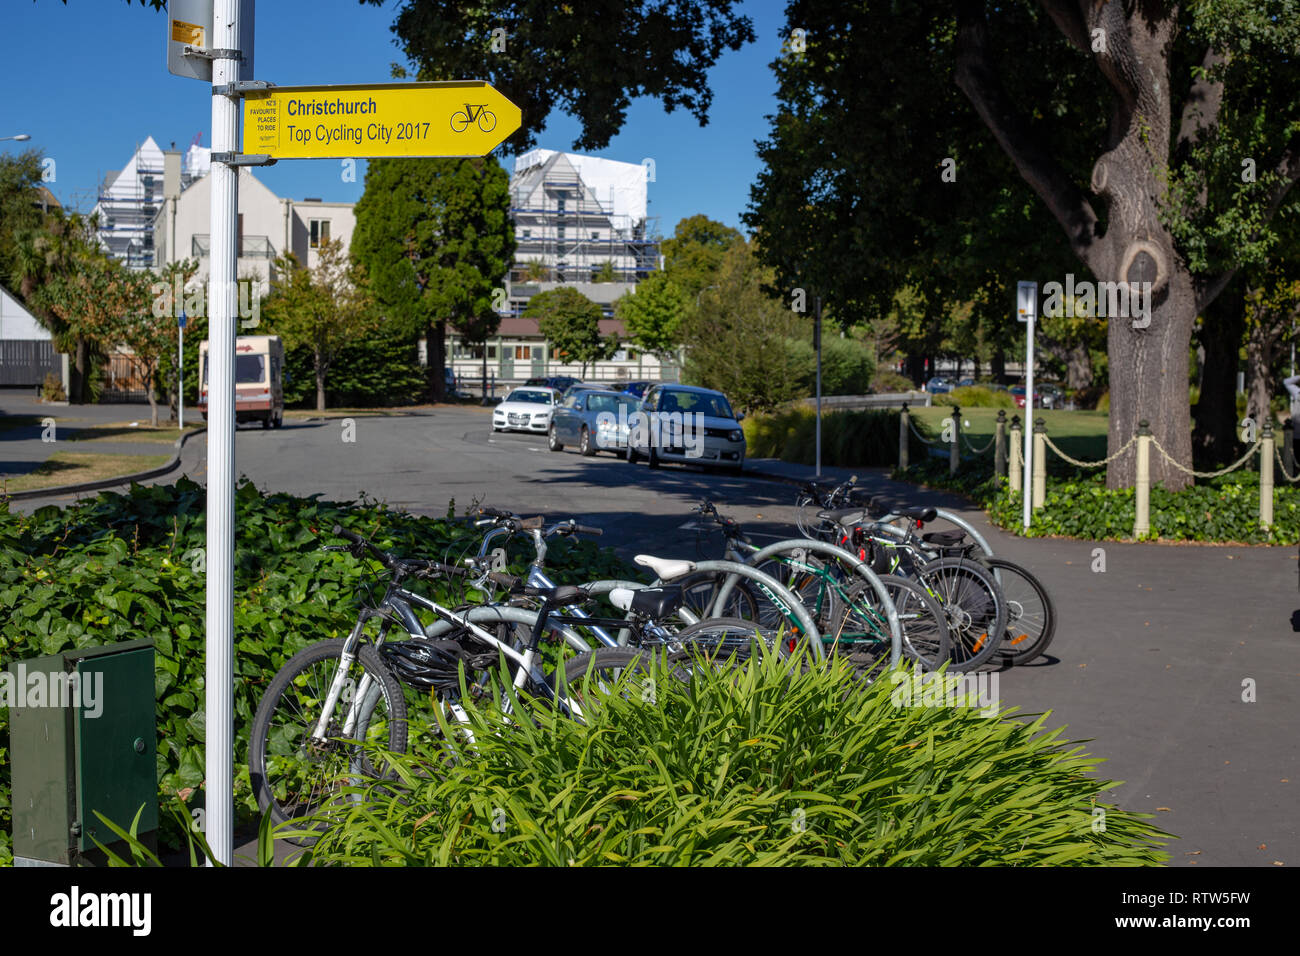 Christchurch, Canterbury, New Zealand, March 1 2019: Promoting cycling in the city with signs and digital signage Stock Photo